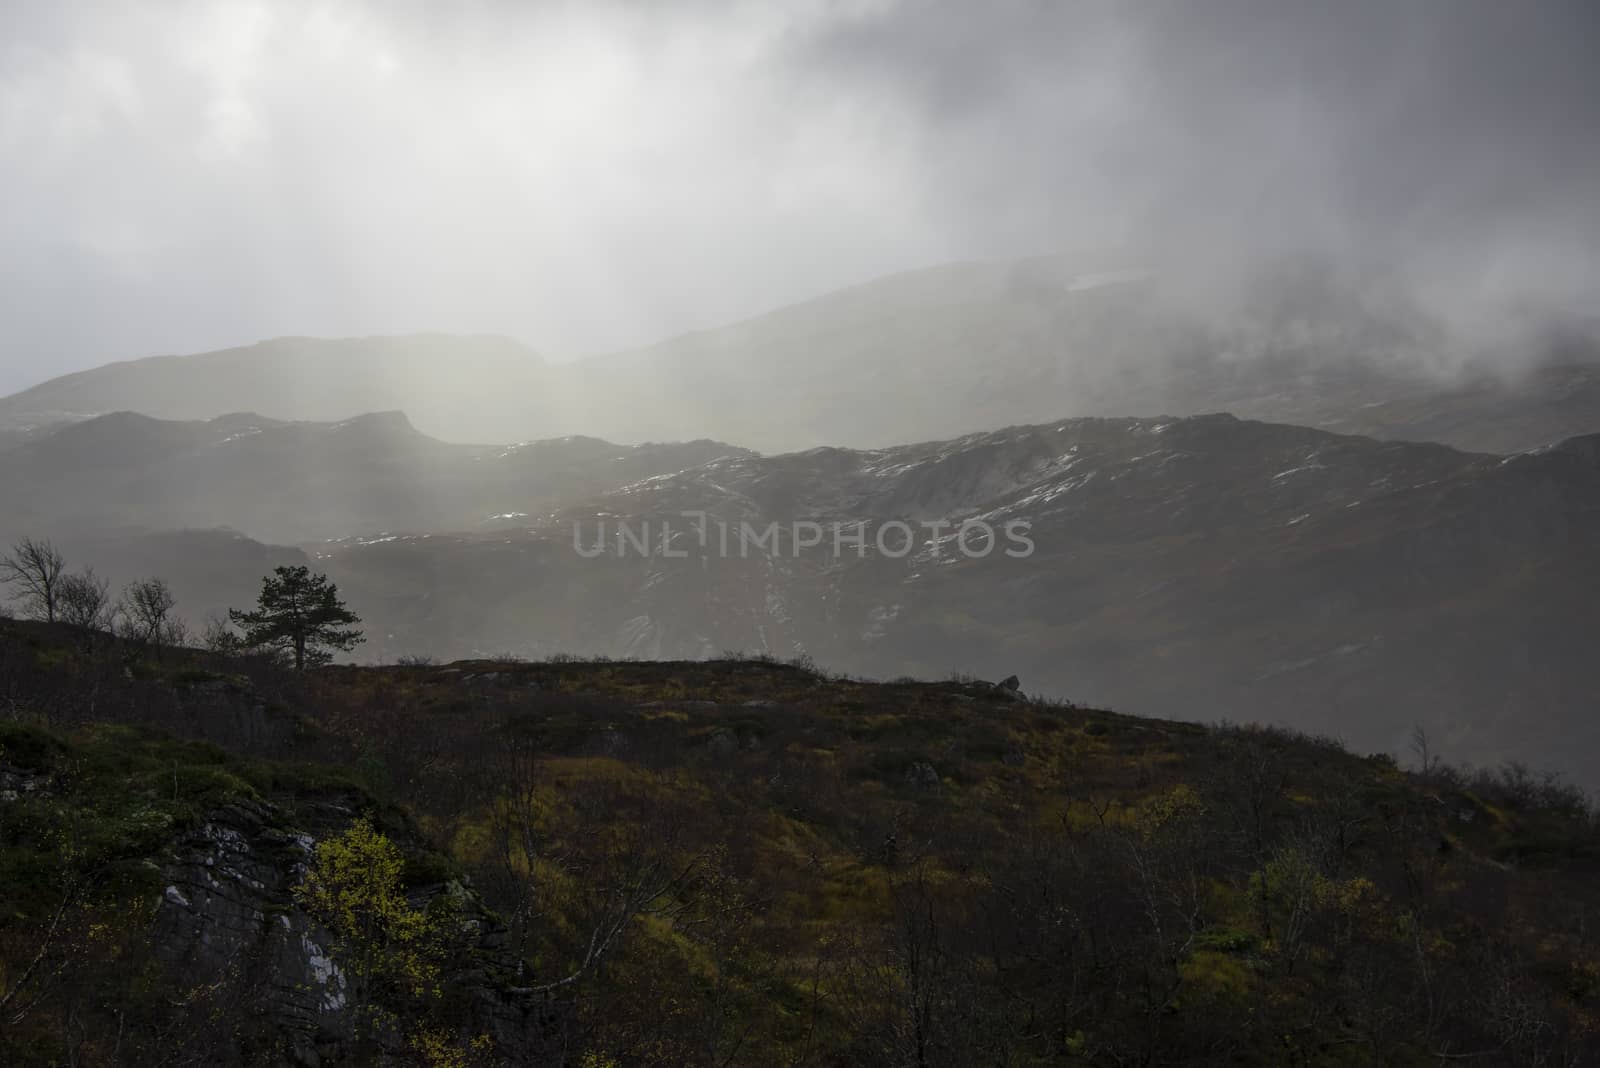 Heavy clouds, light beams and rain in the mountain